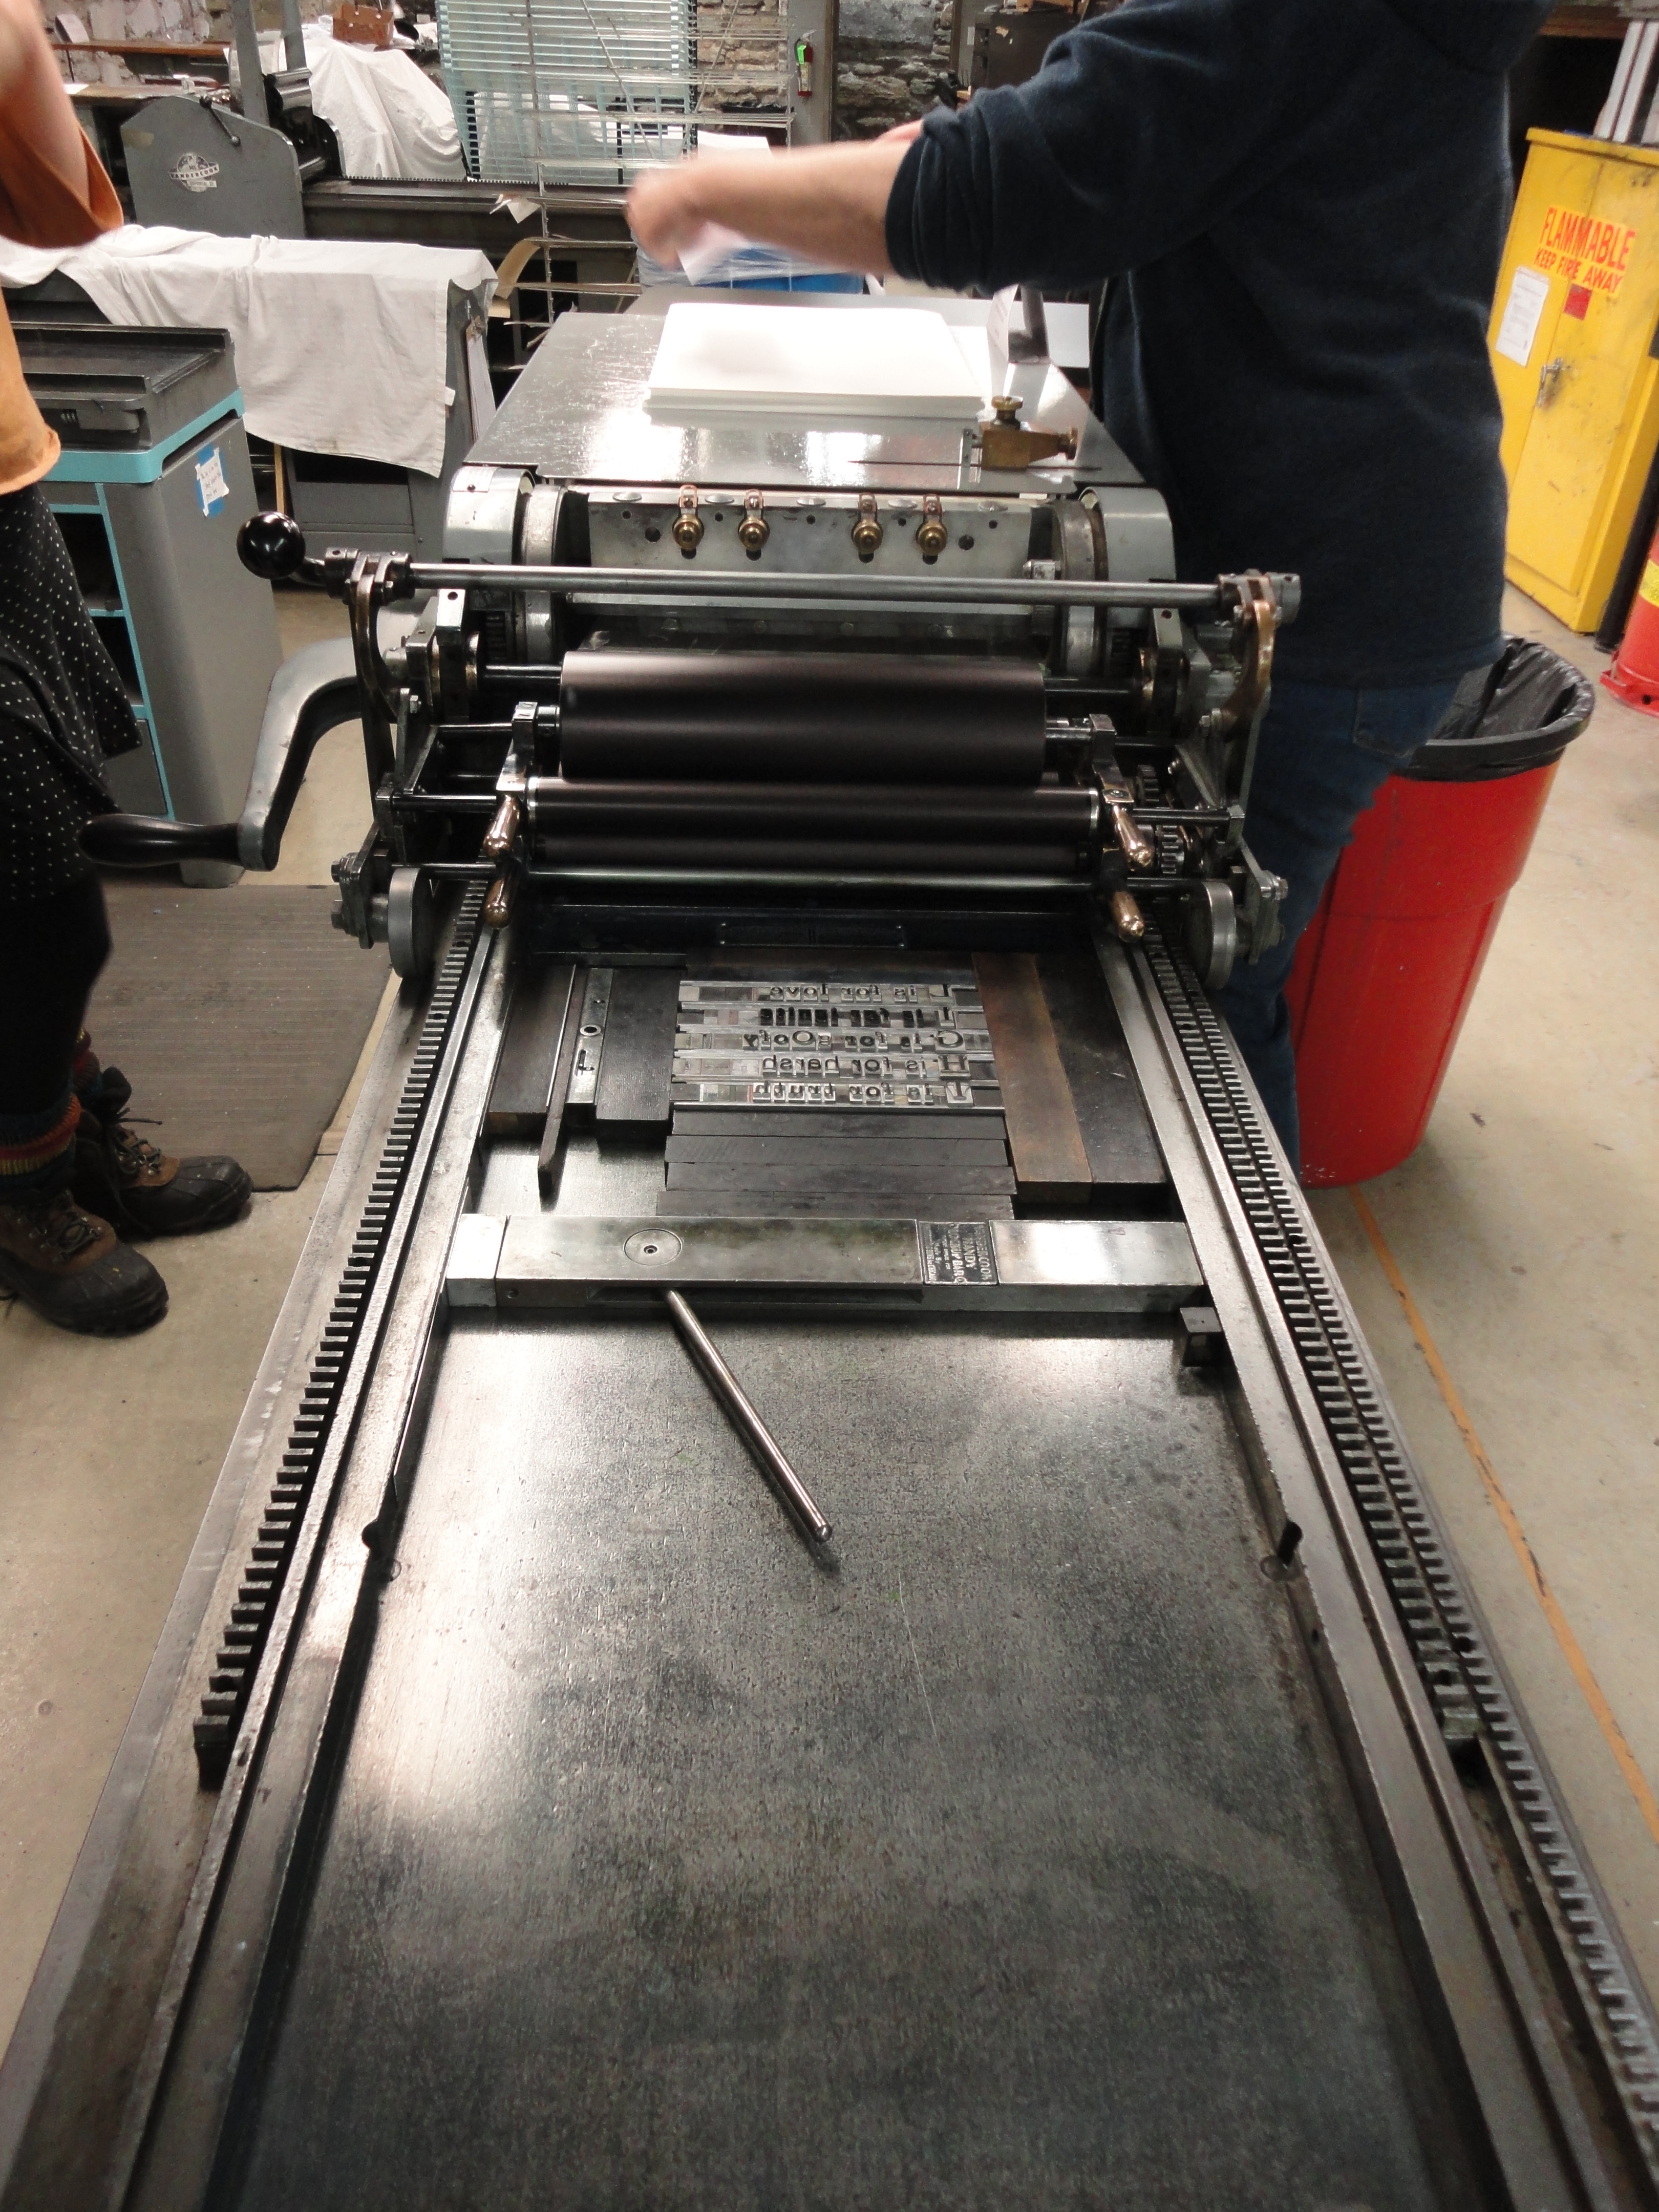 Once the type is locked into place on the press bed, the printing can begin.